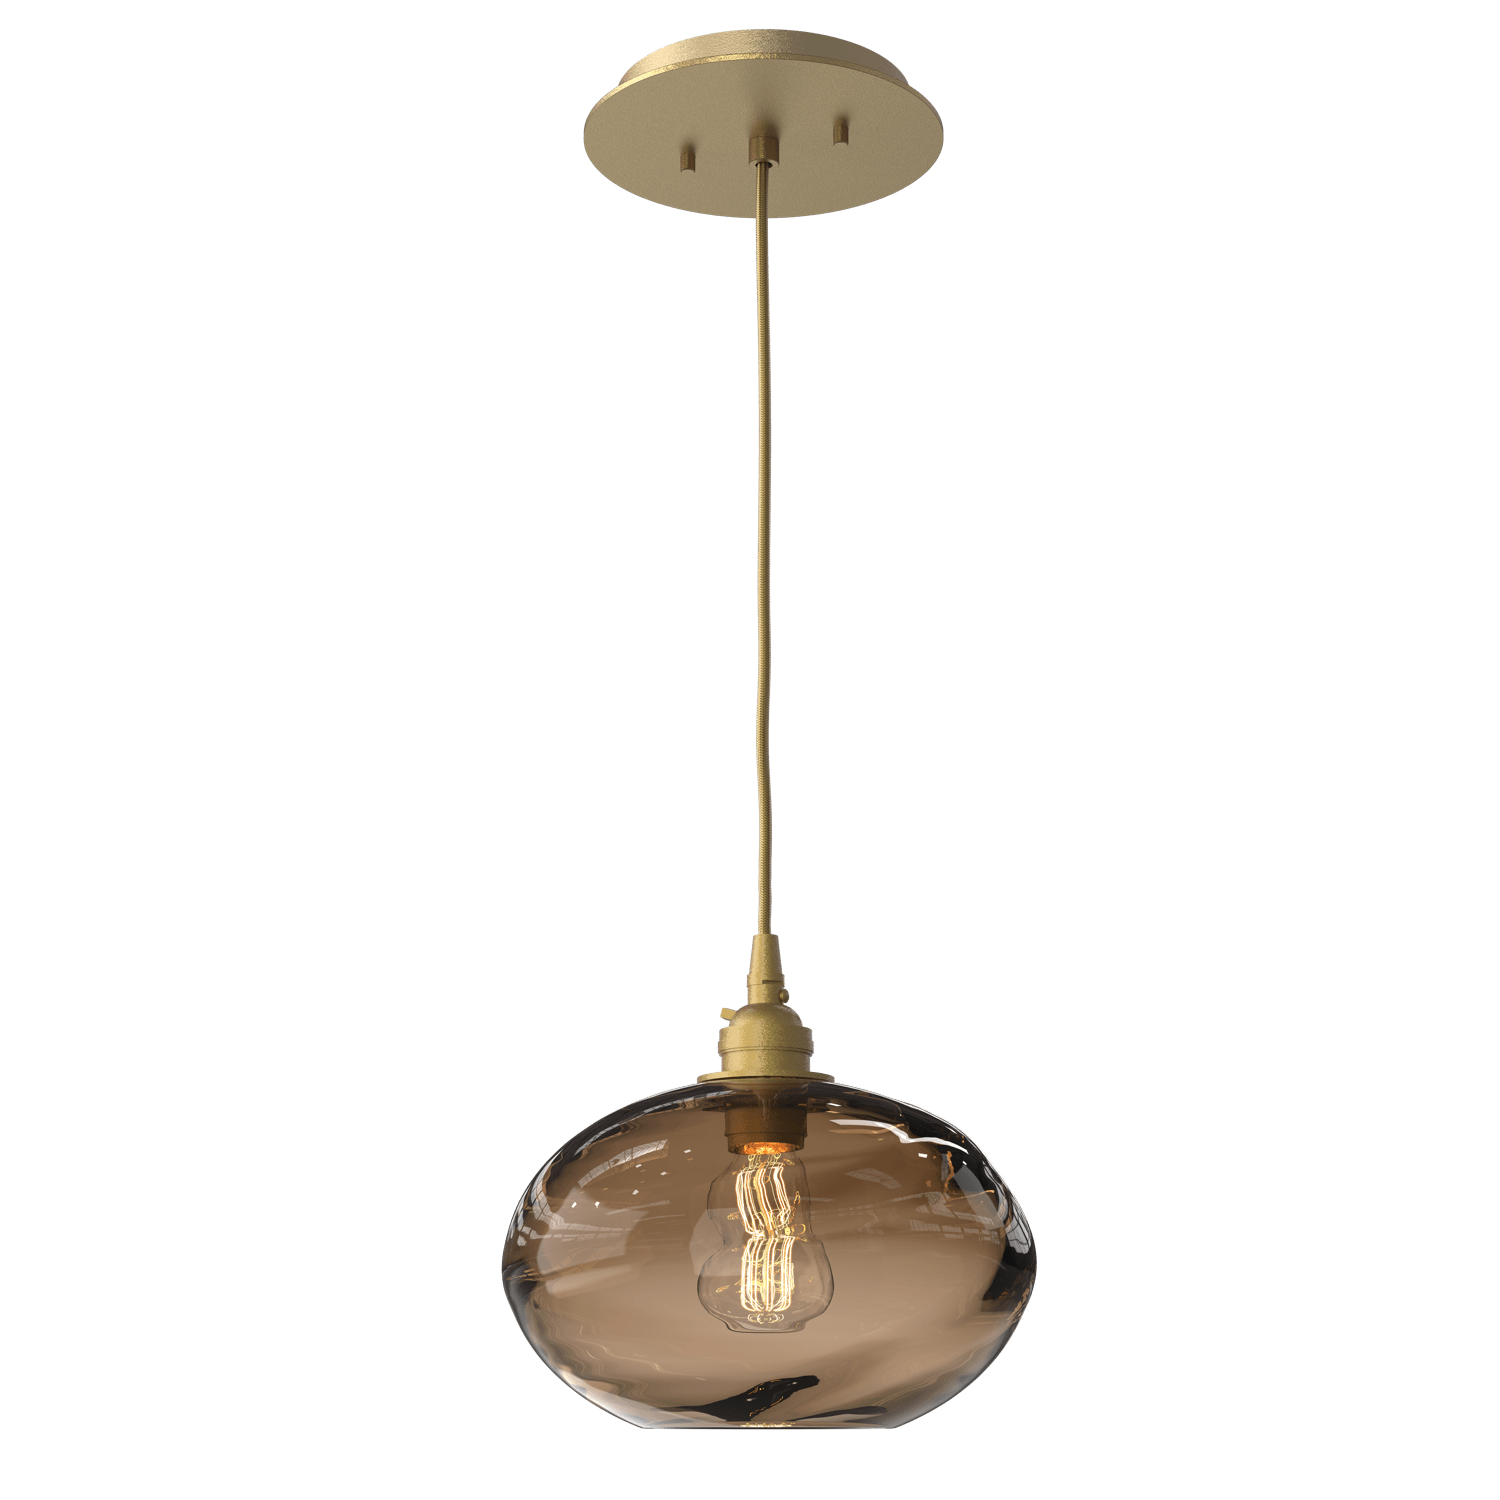 LAB0036-01-GB-OB-Hammerton-Studio-Optic-Blown-Glass-Coppa-pendant-light-with-gilded-brass-finish-and-optic-bronze-blown-glass-shades-and-incandescent-lamping